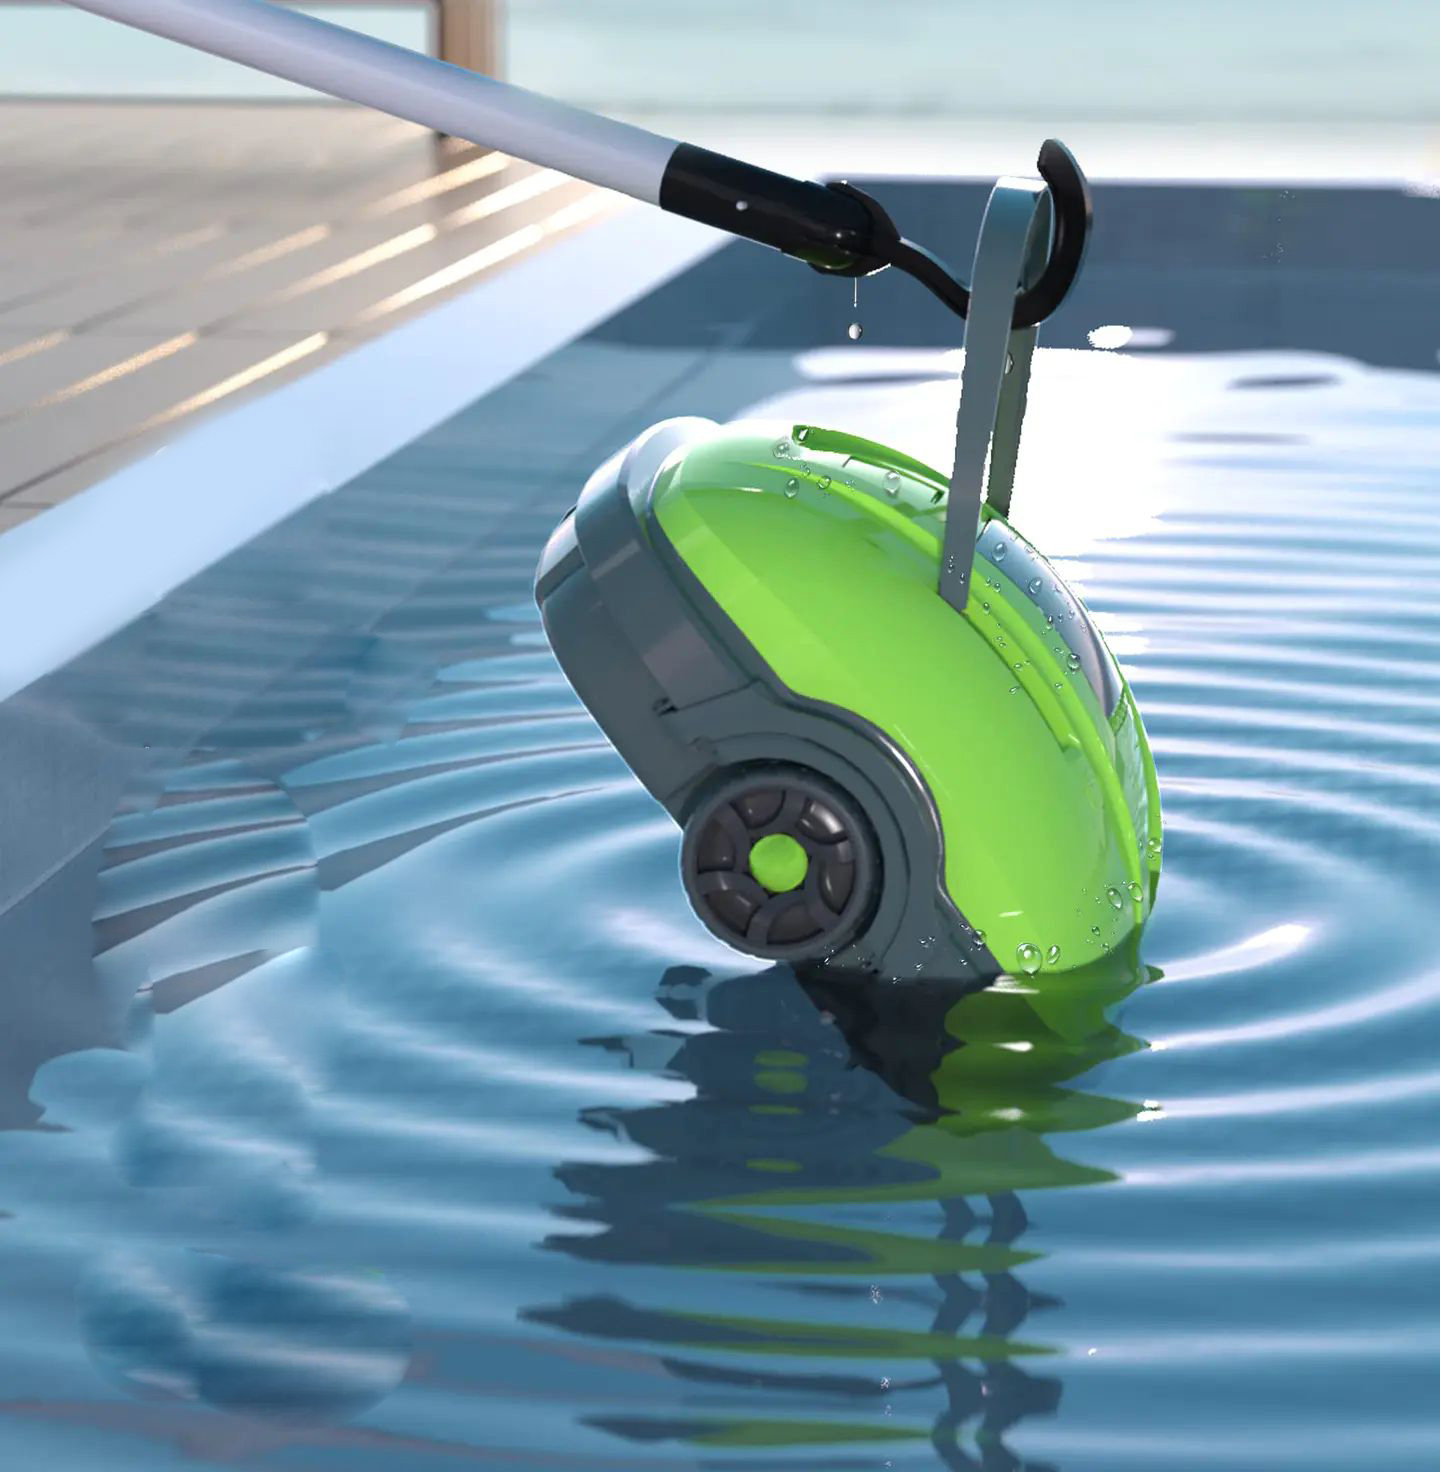 Corporationless swimming pool cleaning robot